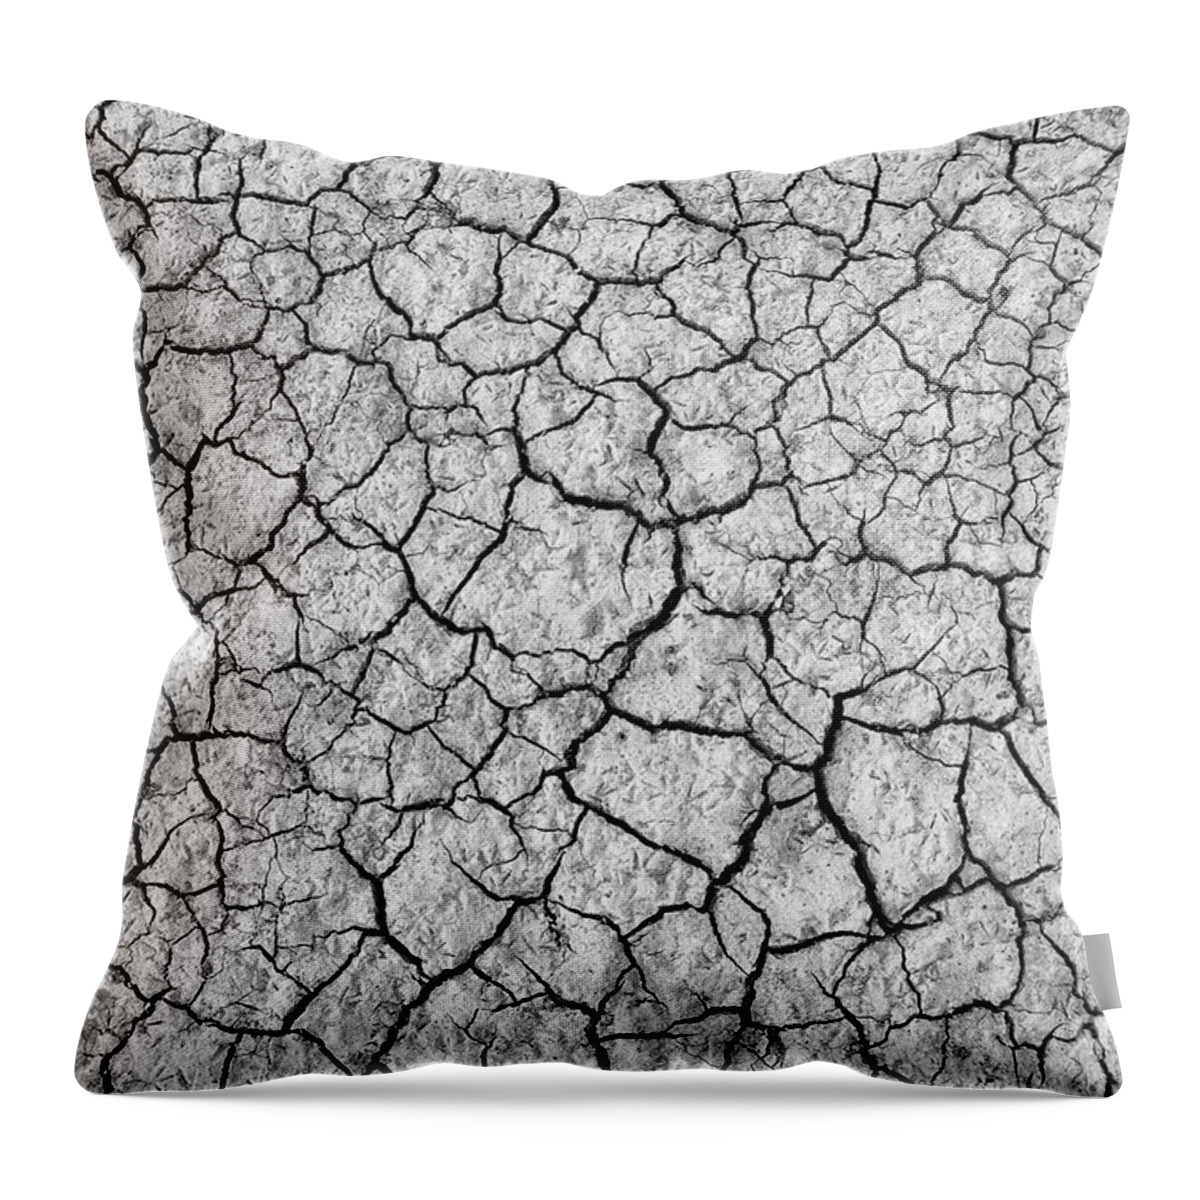 Cracked Earth Pattern Canvas Print / Canvas Art by Tim Gainey